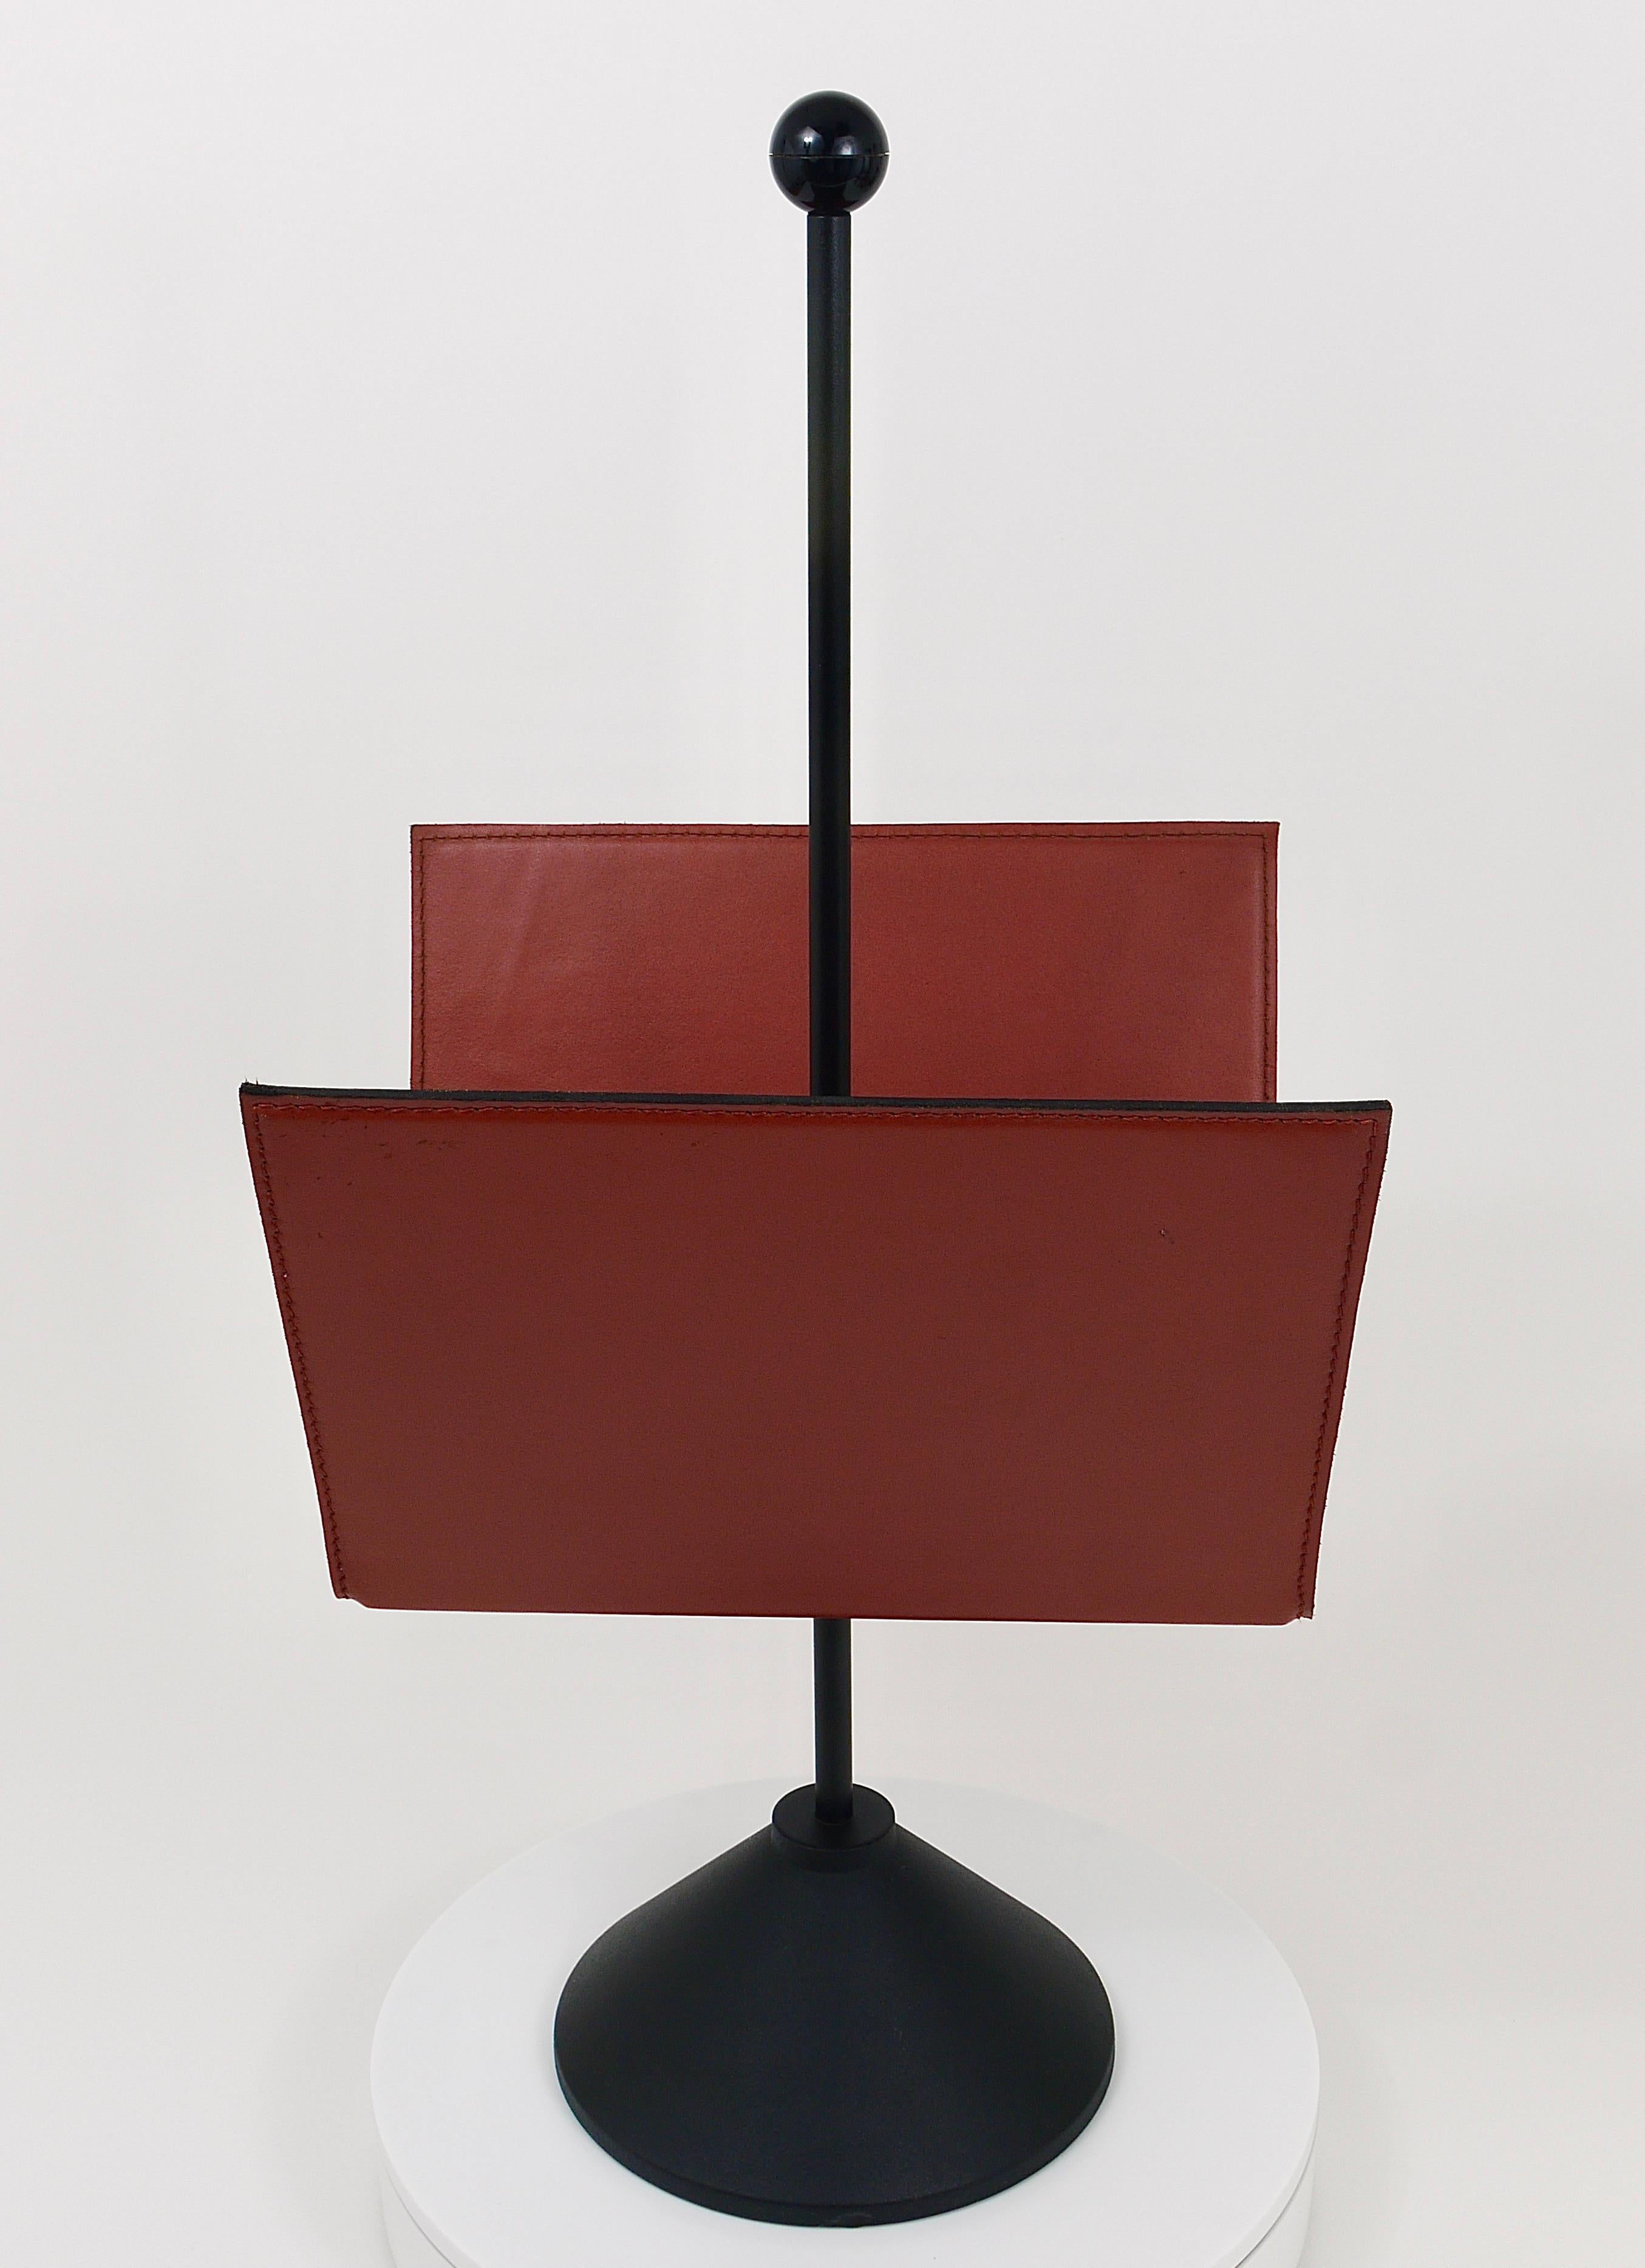 A beautiful post modern minimalist newspaper stand / magazine rack from the 1980s. Manufactured by Porada Arredi, Italy. Made of black metal and cognac brown tan leather, with a solid conical cast iron base and a nice plastic ball on its top. Signed